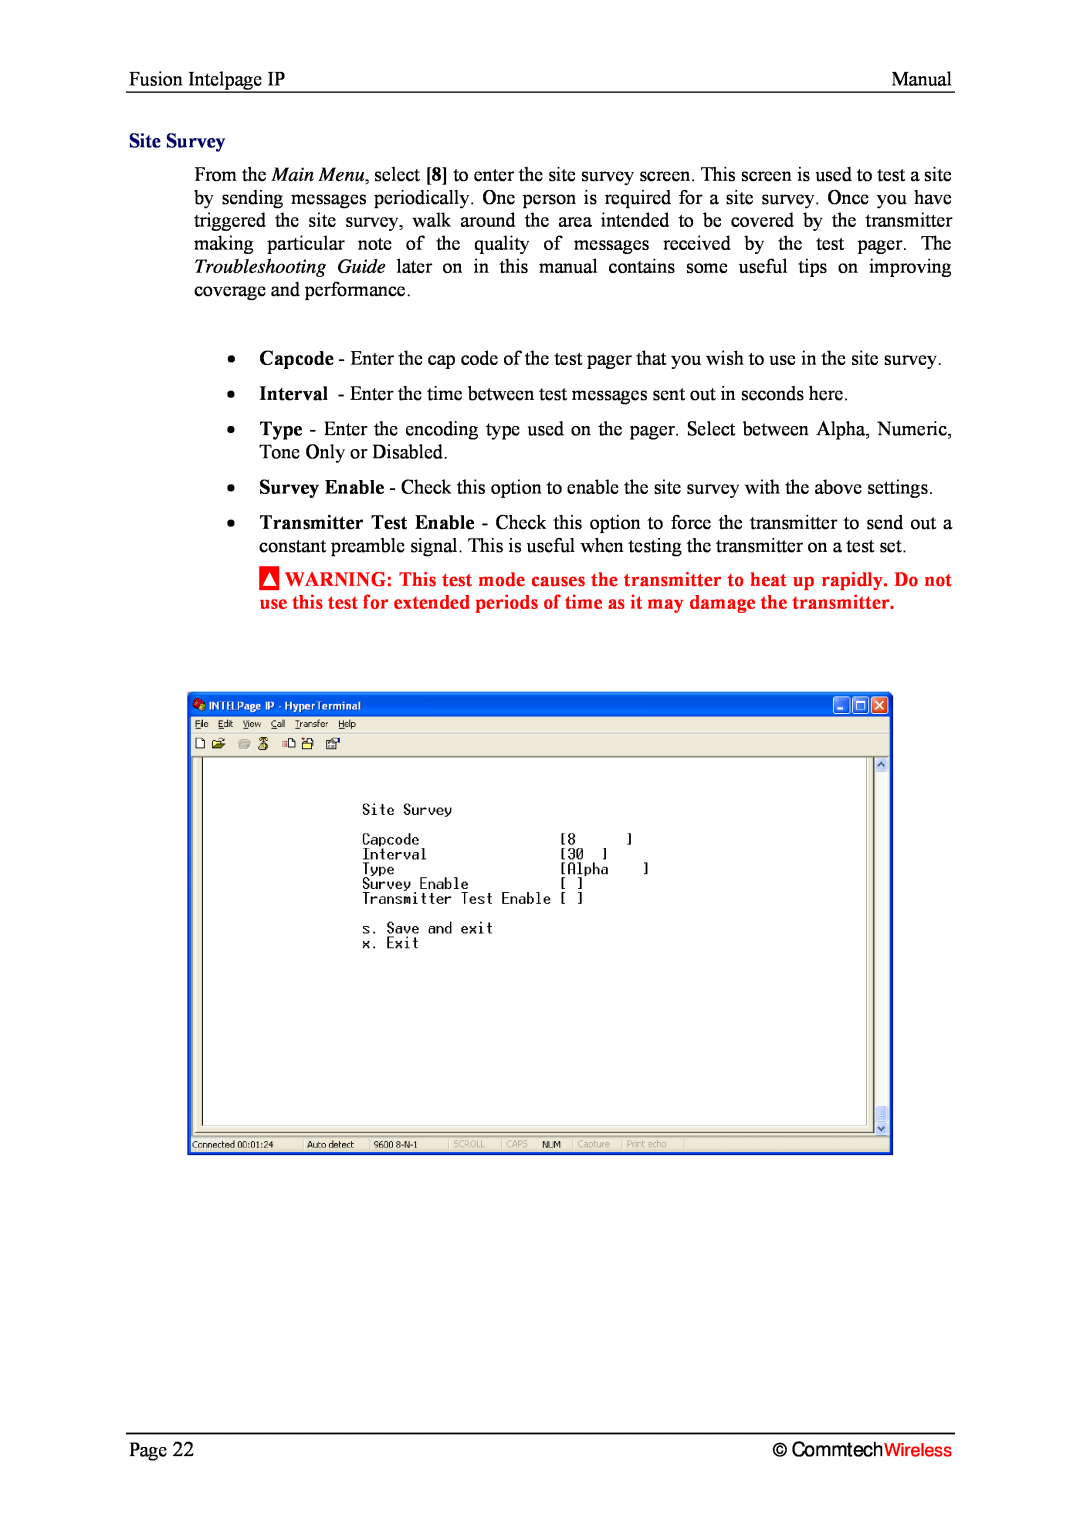 Fusion 2.1, INTELPage IP 5 manual Site Survey, CommtechWireless 